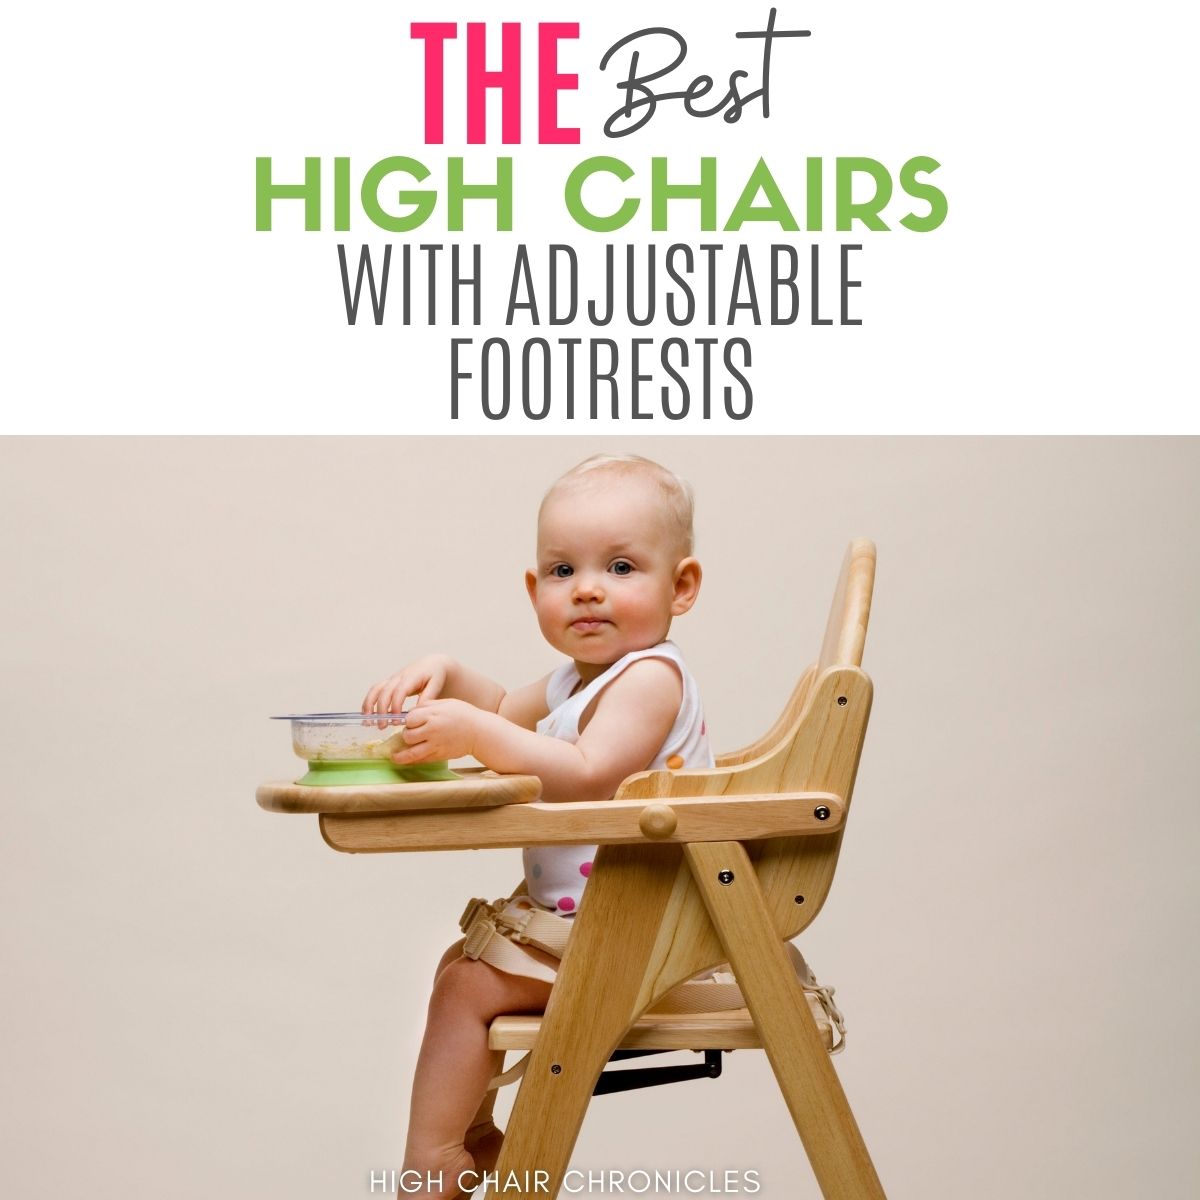 Graphic: best high chairs with adjustable foot rests.